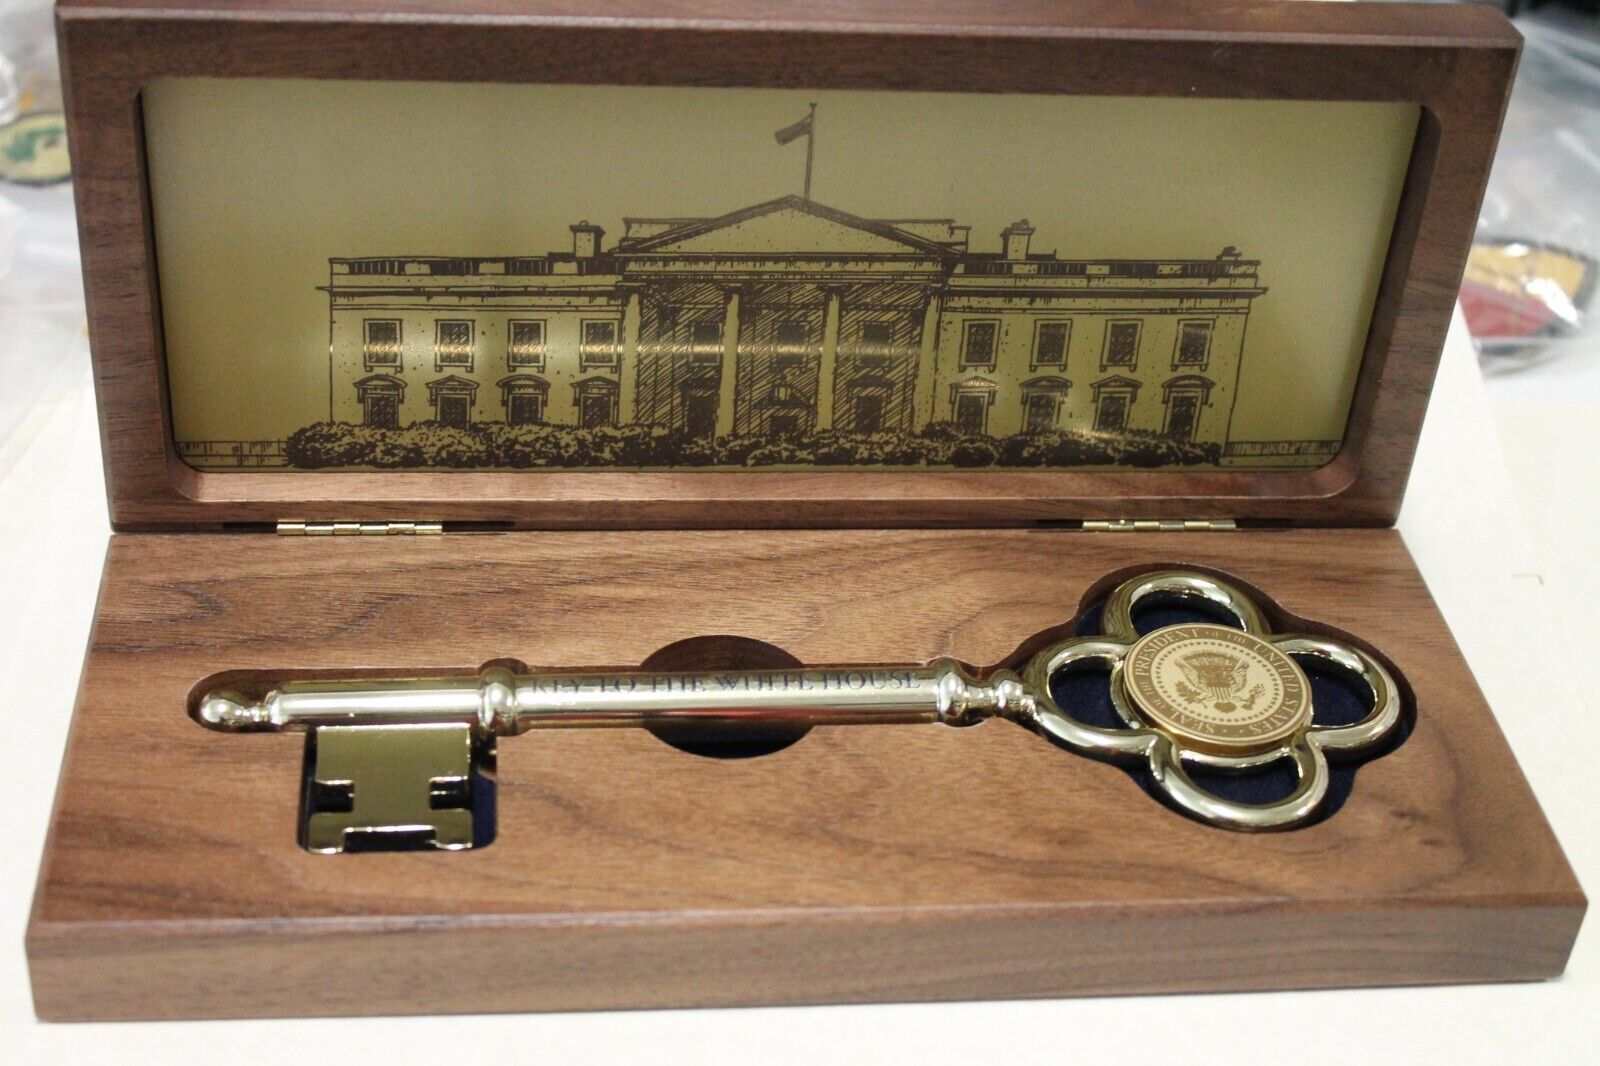 Official President Donald J. Trump Official Key to the White House Rare Item